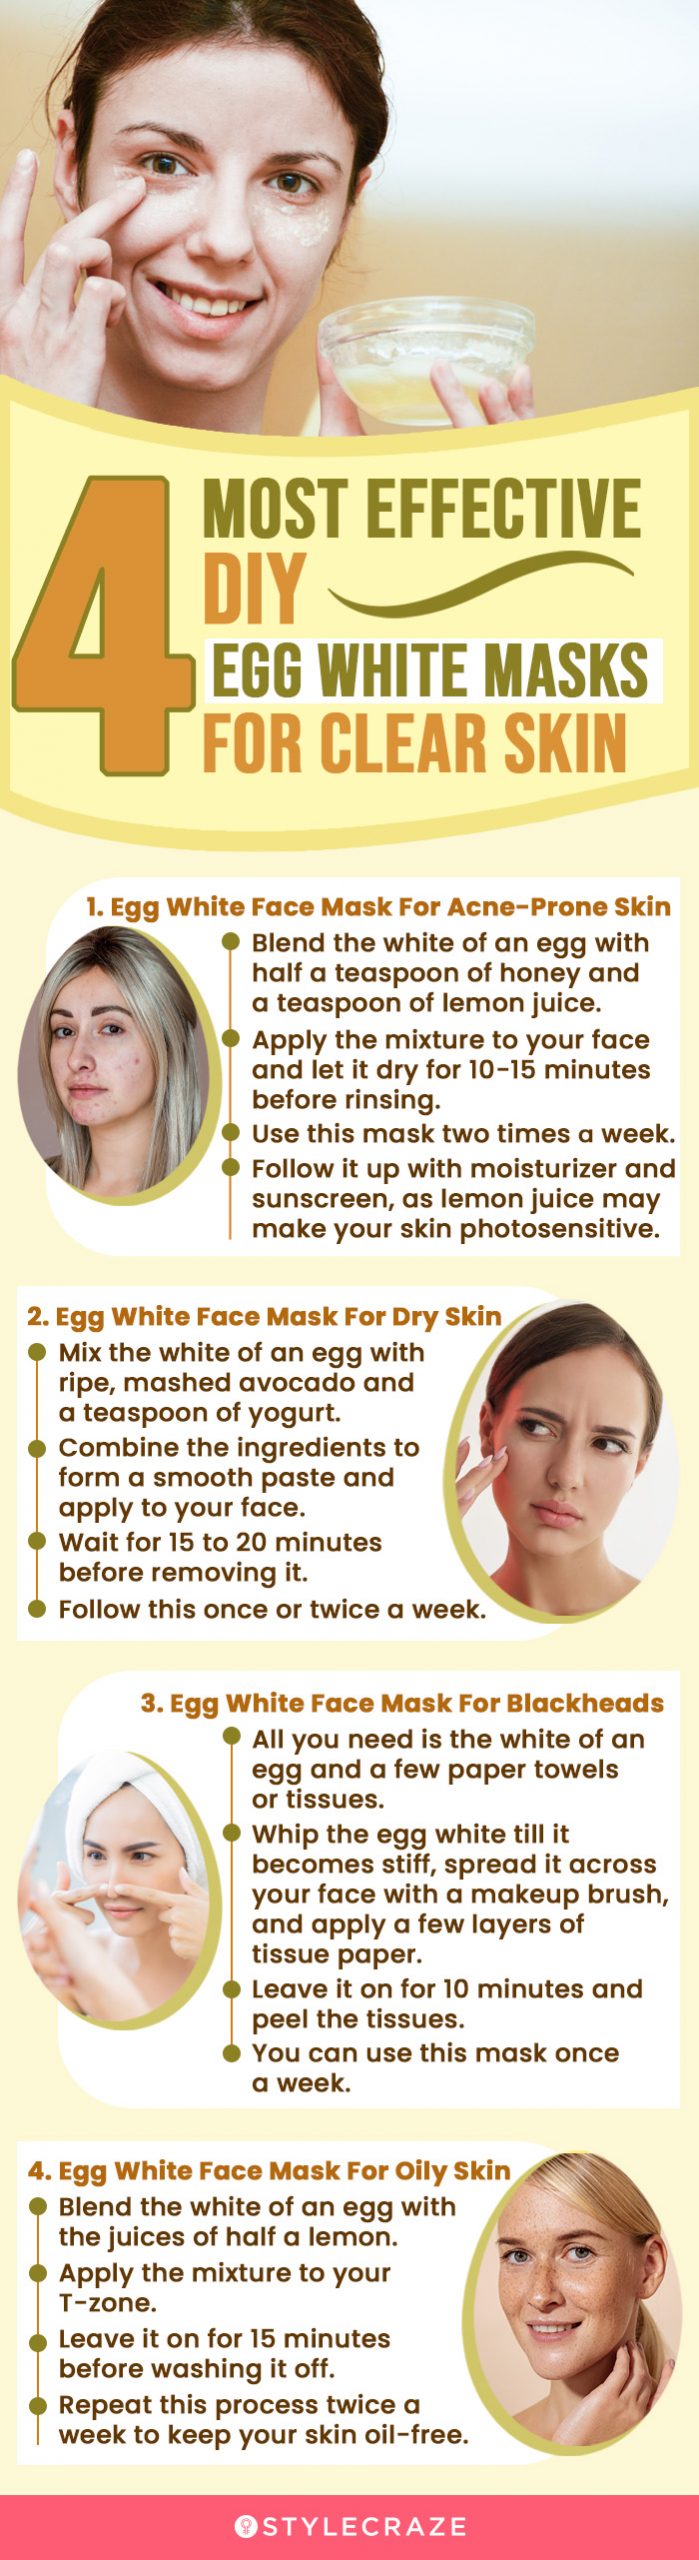 4 most effective diy egg white masks for clear skin (infographic)